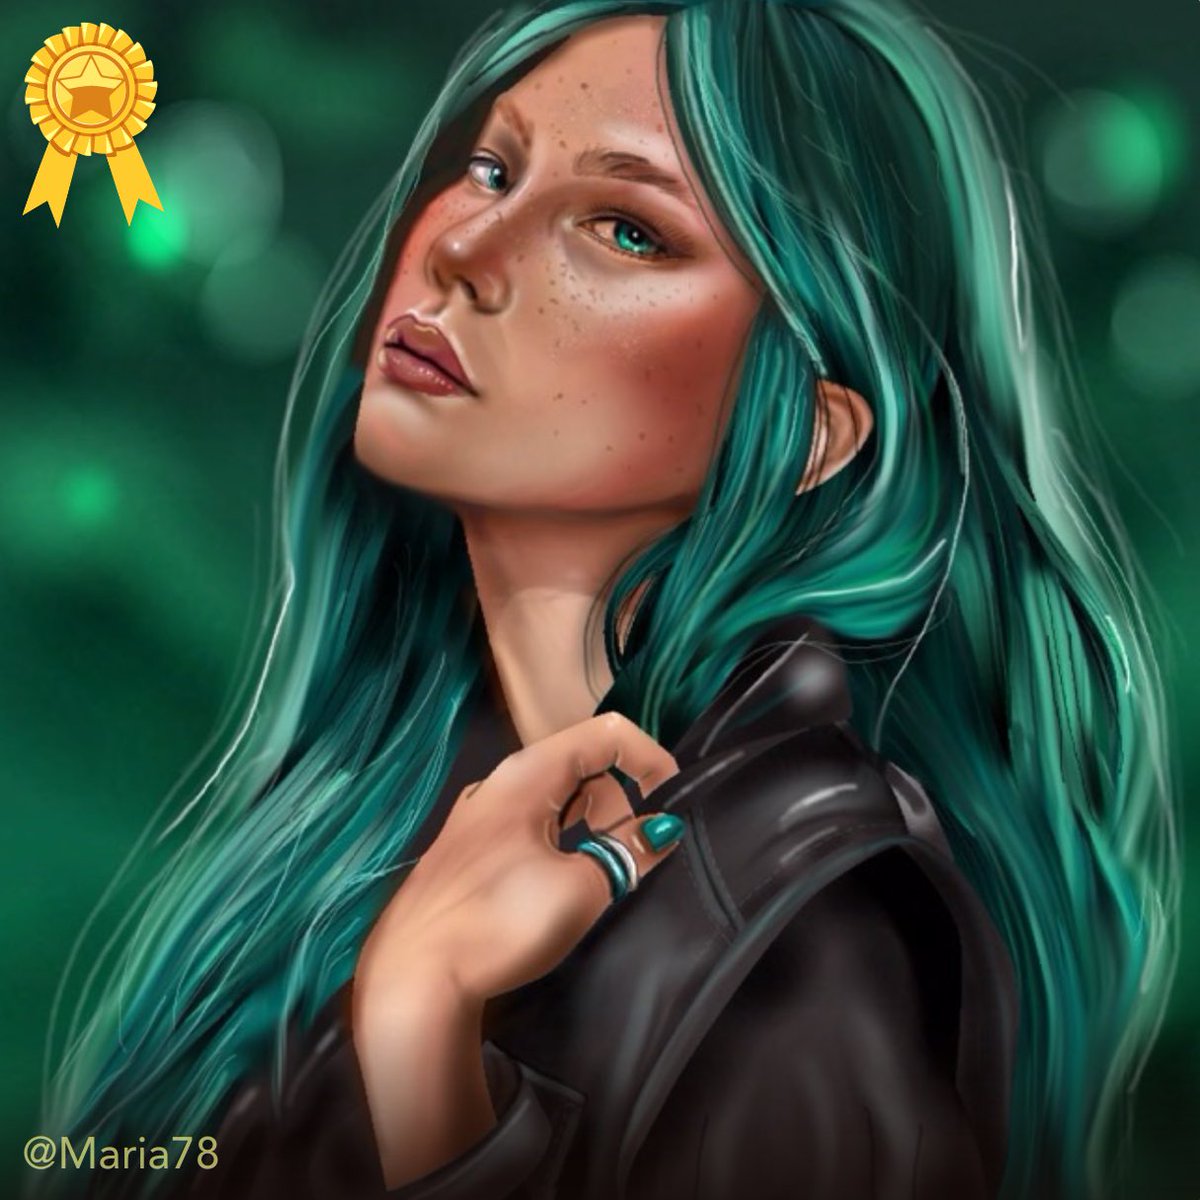 Thanks to all of you who participated in our special #TurquoiseHair challenge. ❤️ Coloring masterpiece ❤️ by the talented @ Maria78 (user inside app) is our Notable Pick Of The Day. #coloring #coloringbook #digitalart #drawing #drawingart #hair #haircolor